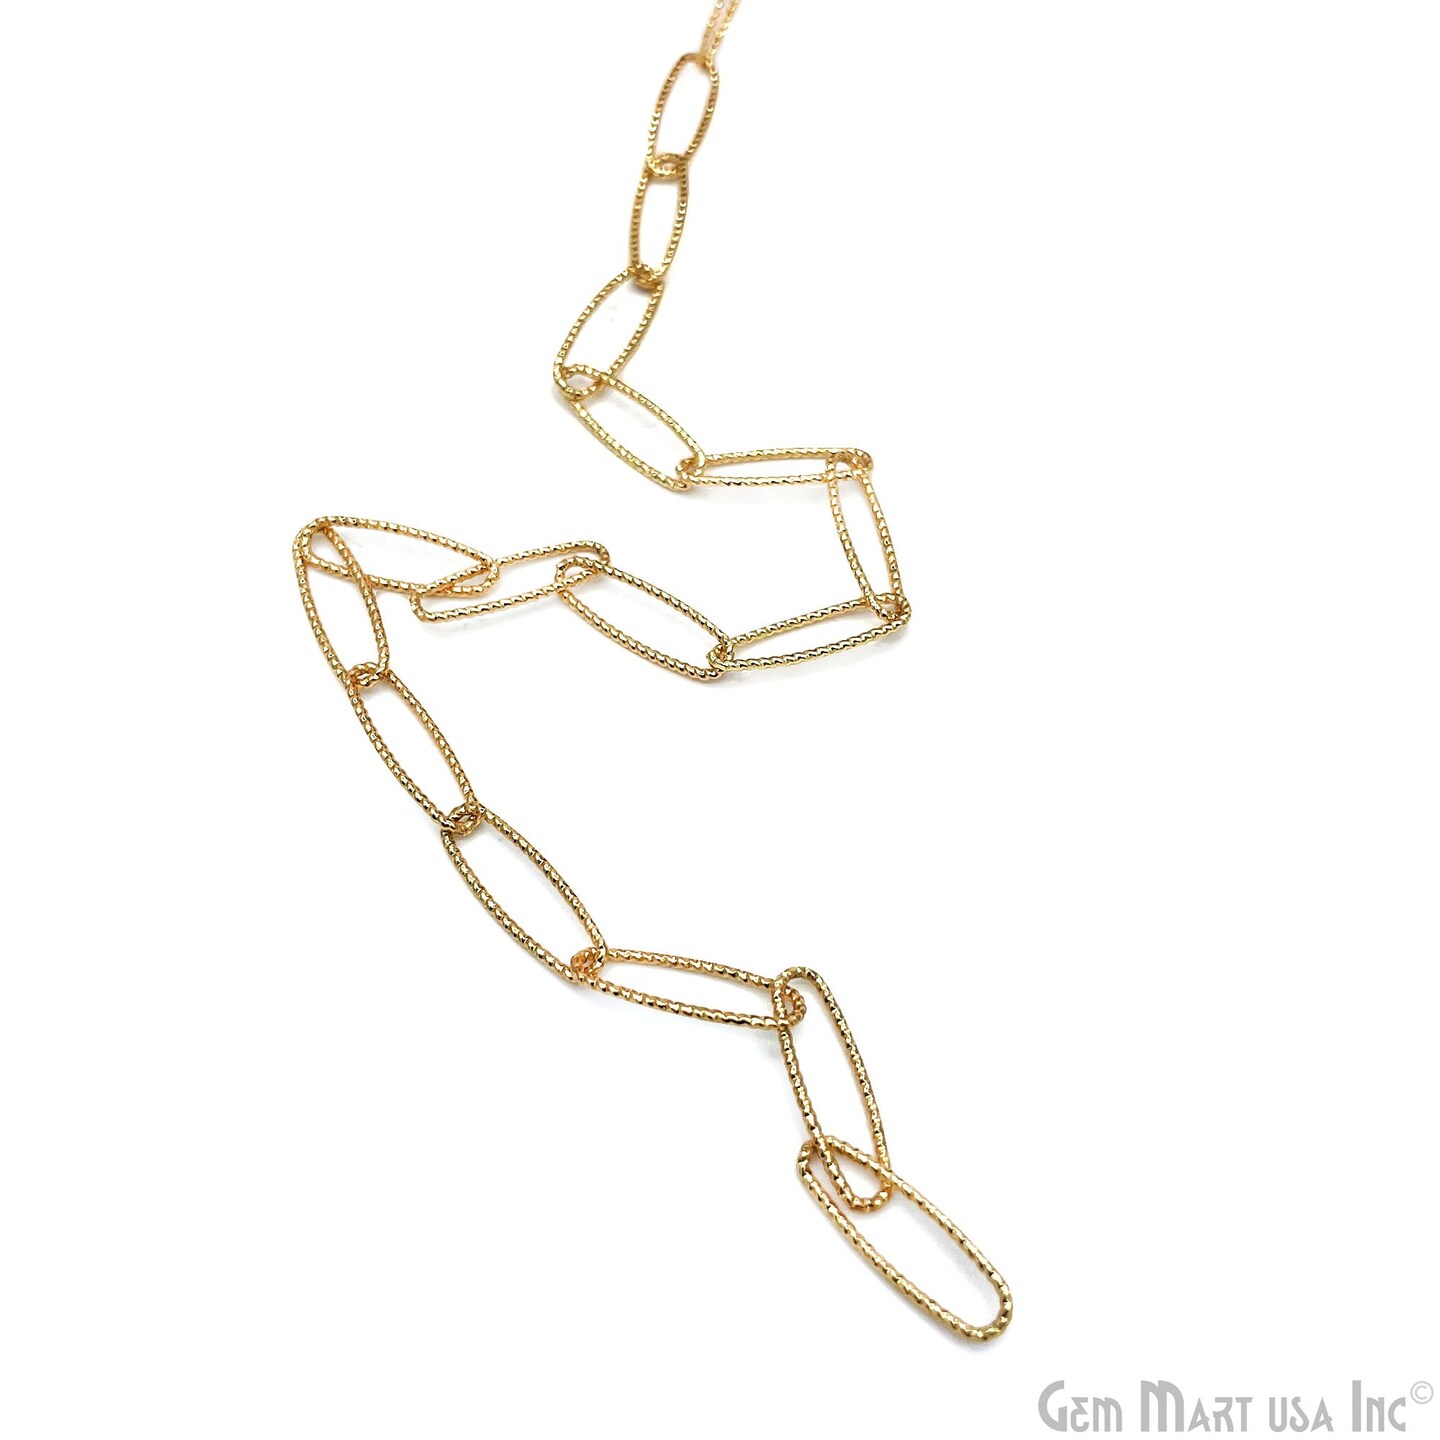 Gold Finding Chain, Gold Plated Jewelry Making Chain, DIY Necklace Chain, Assorted Styles, 1 foot, GemMartUSA (GPCH)